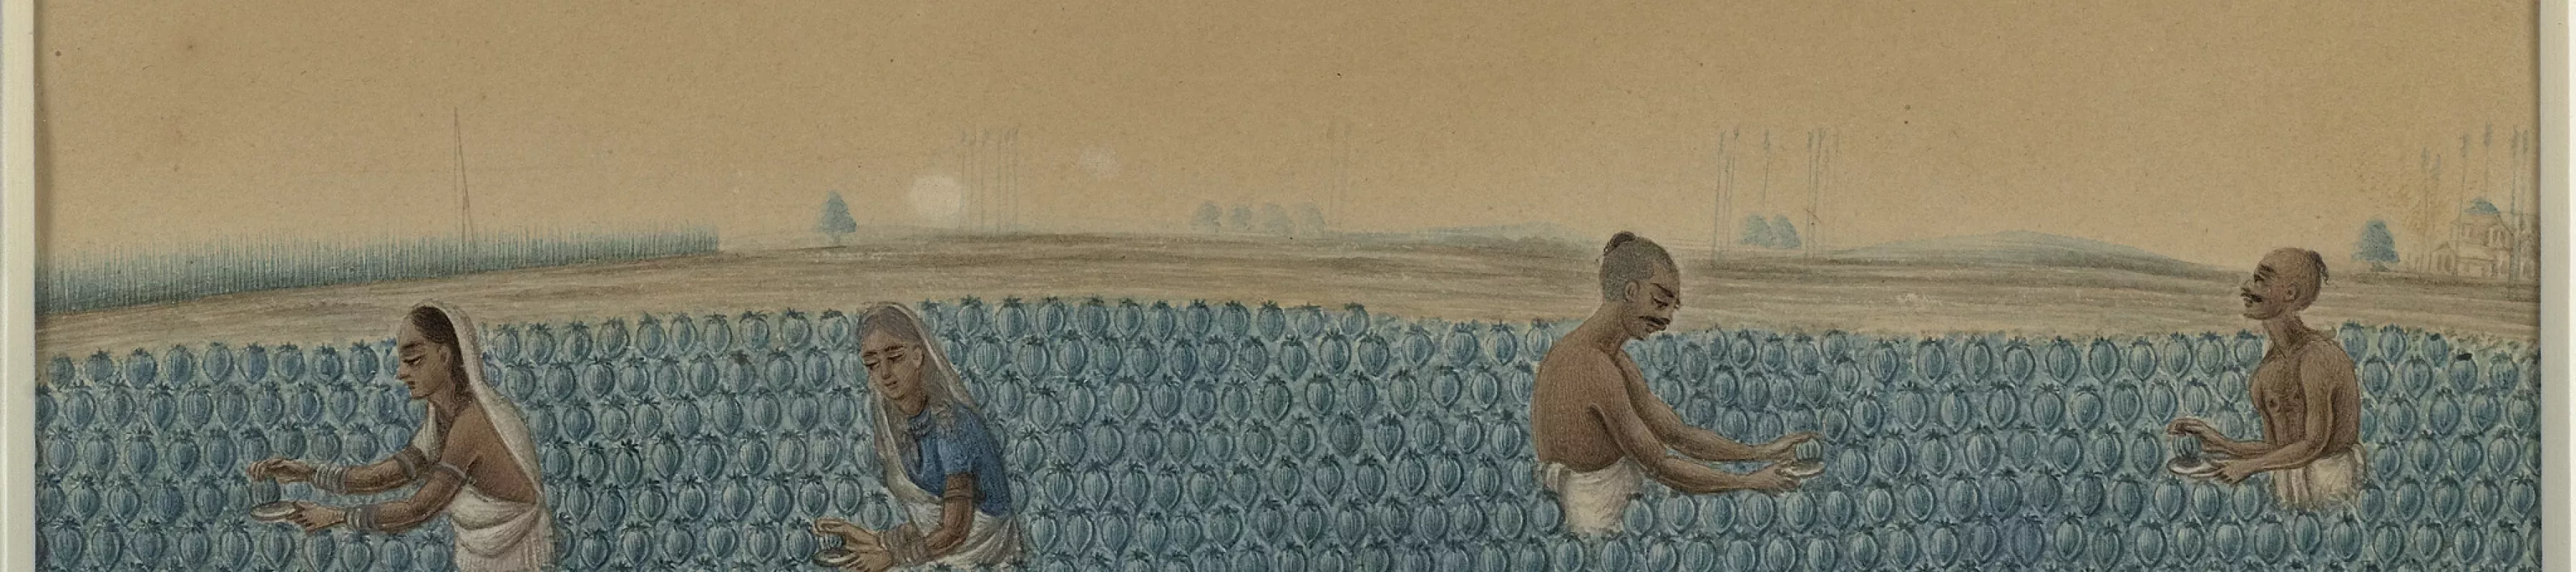 Sketch showing workers in a field gathering opium from the plant's capsules